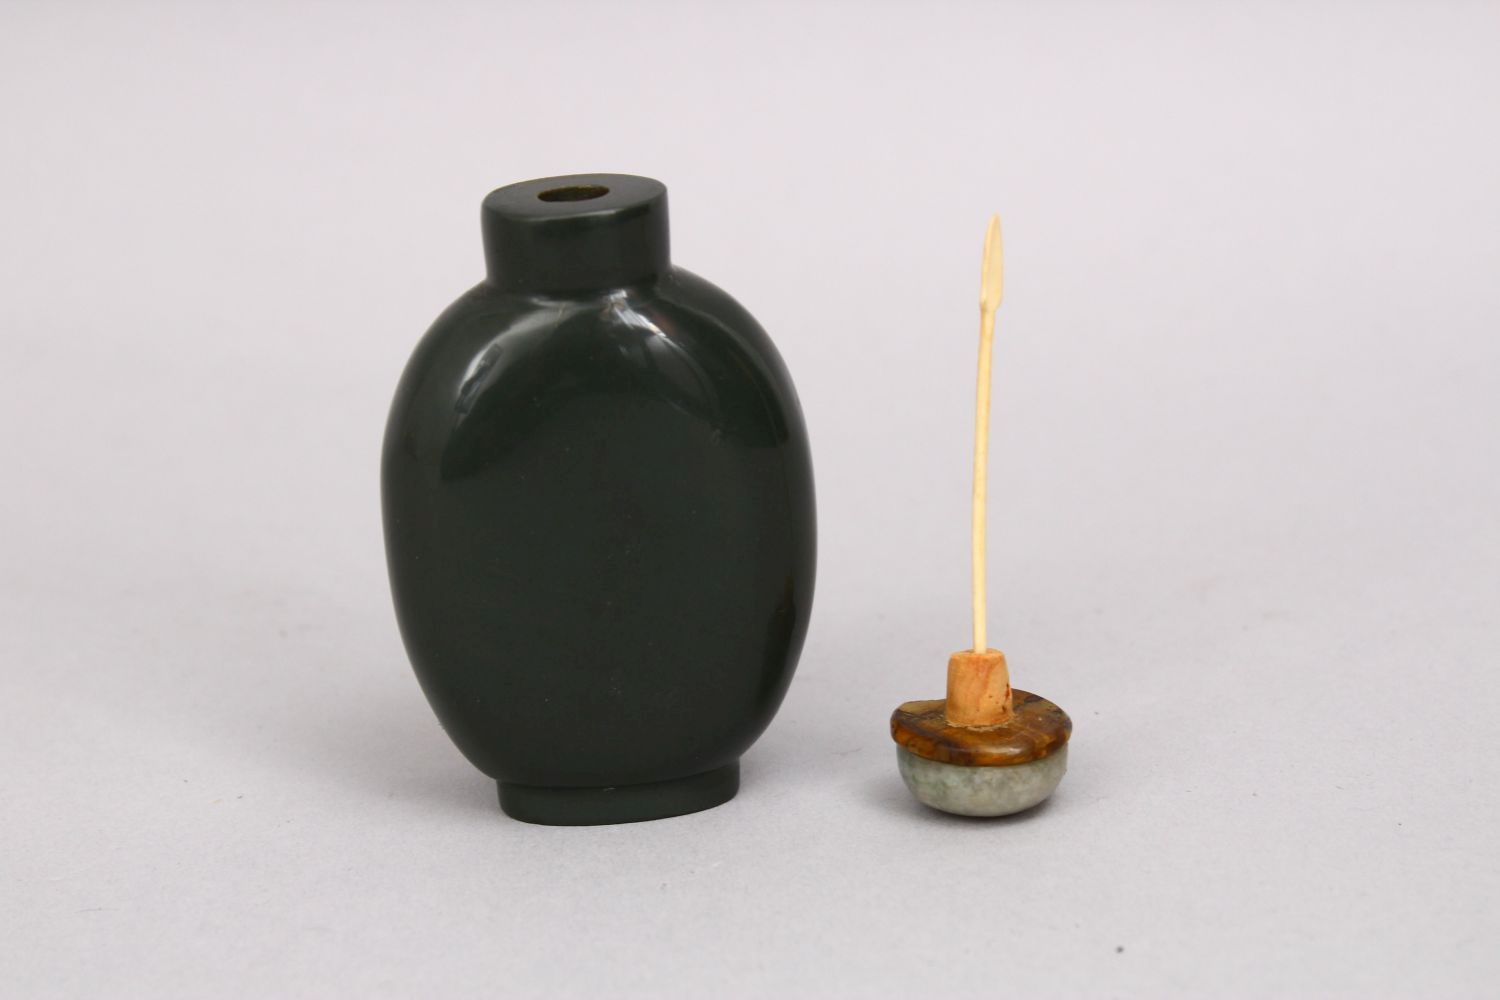 A GOOD 19TH / 20TH CENTURY CHINESE CARVED GLASS OVERLAID SNUFF BOTTLE, with a hardstone stopper - Image 2 of 2